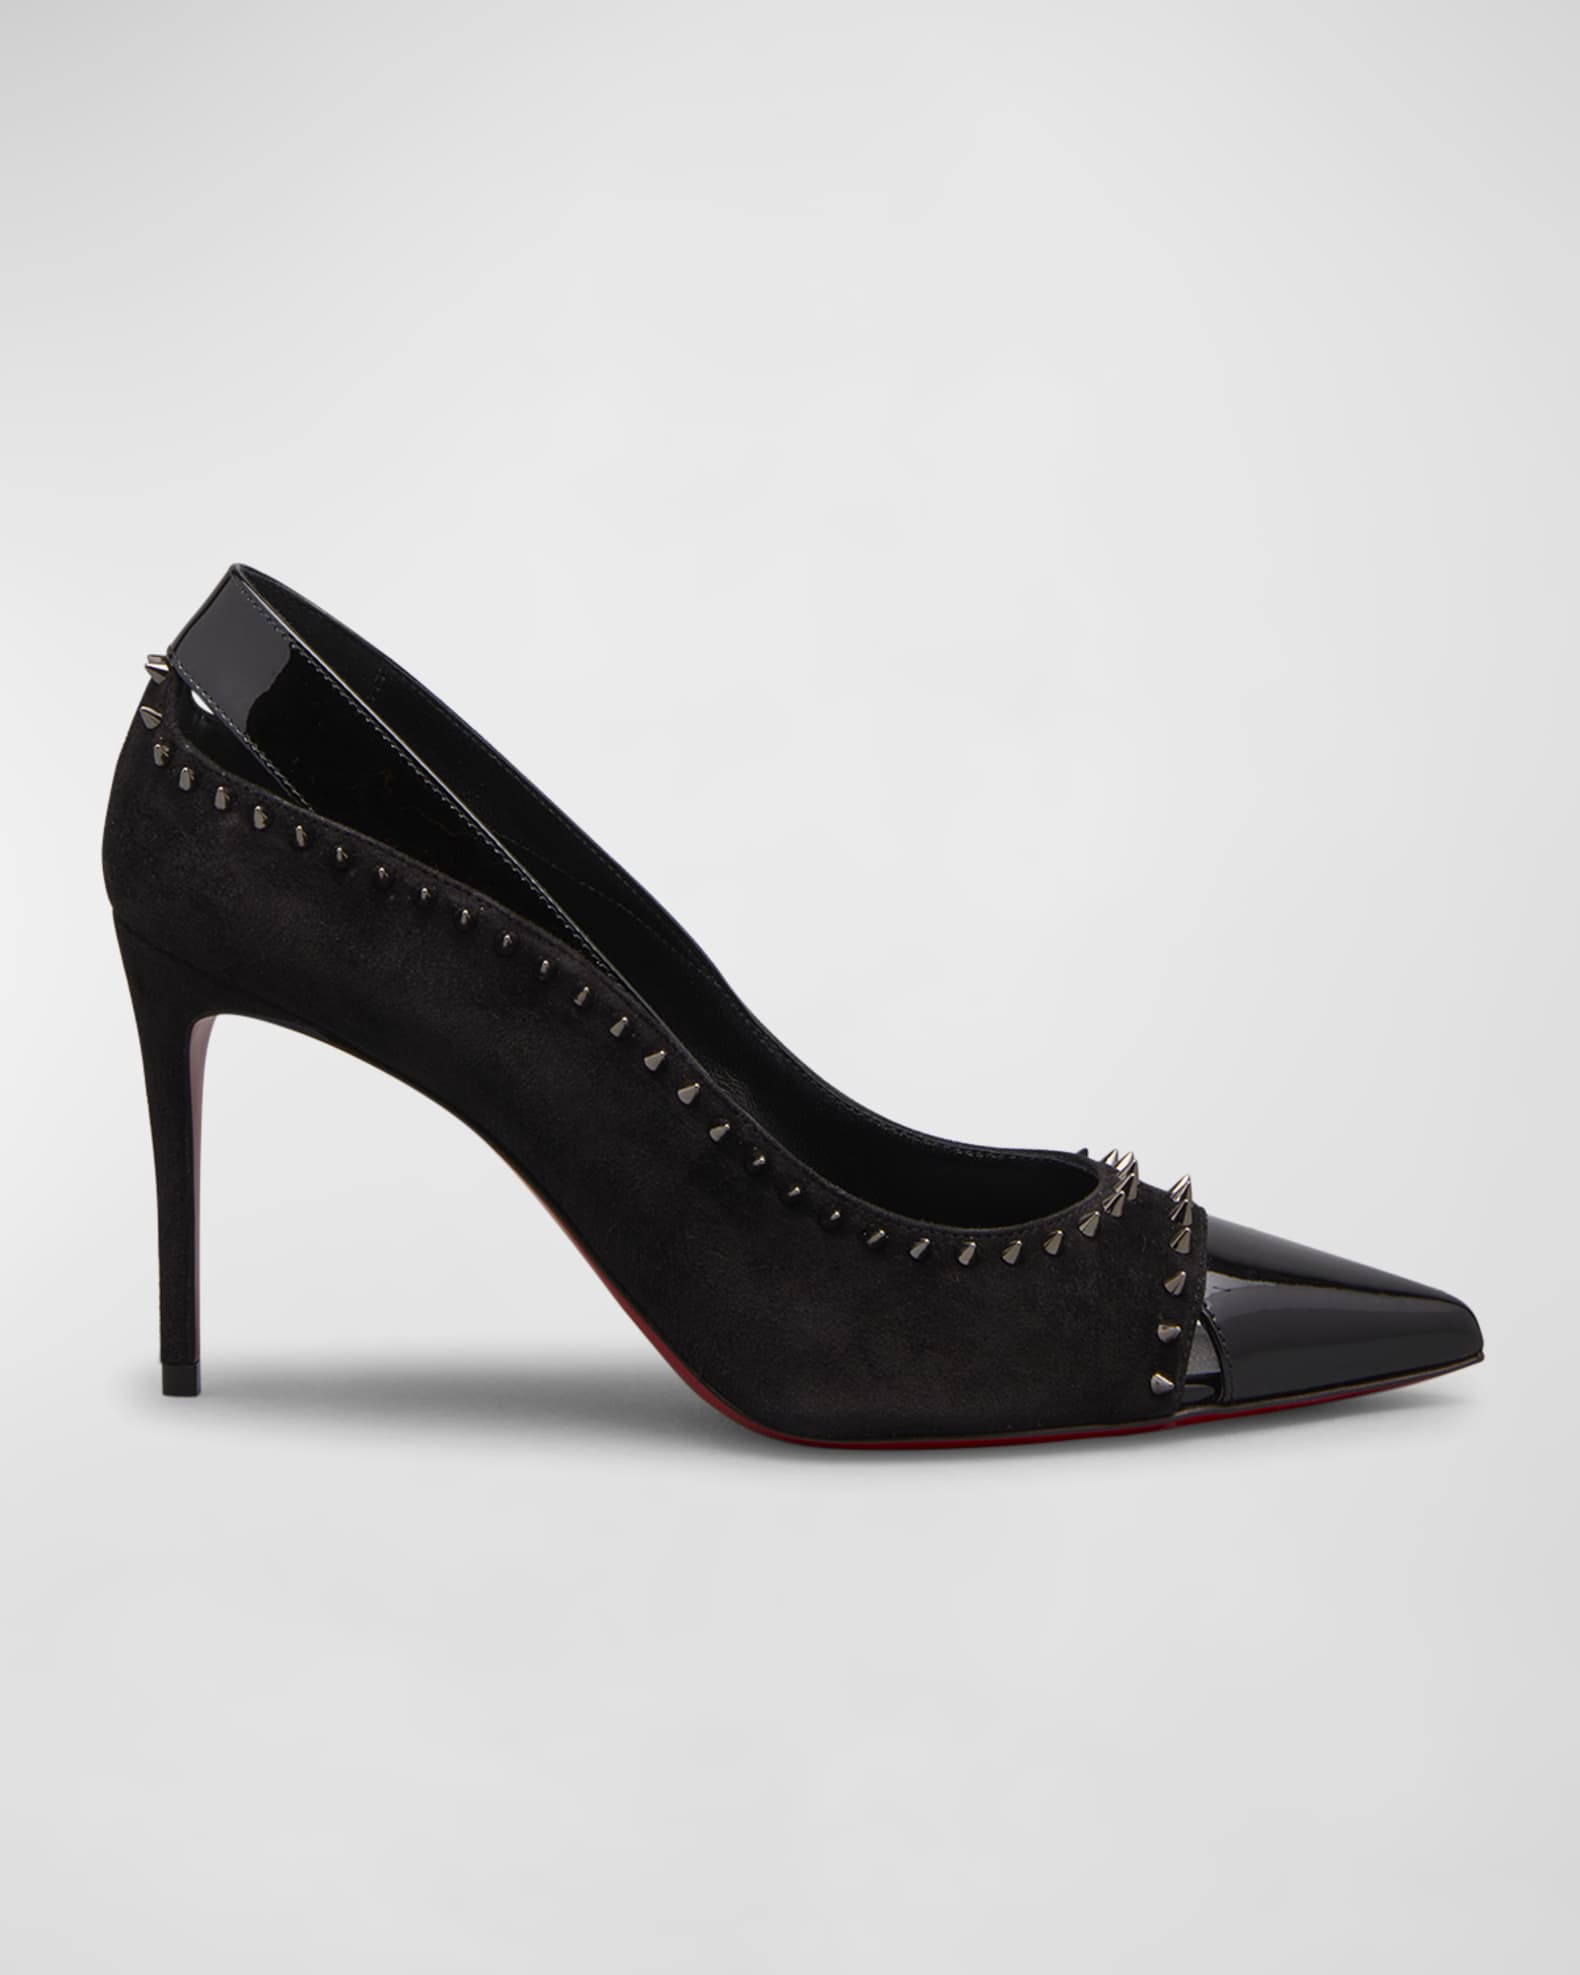 Louboutin Duvette Spike Red Sole Pumps | Neiman Marcus